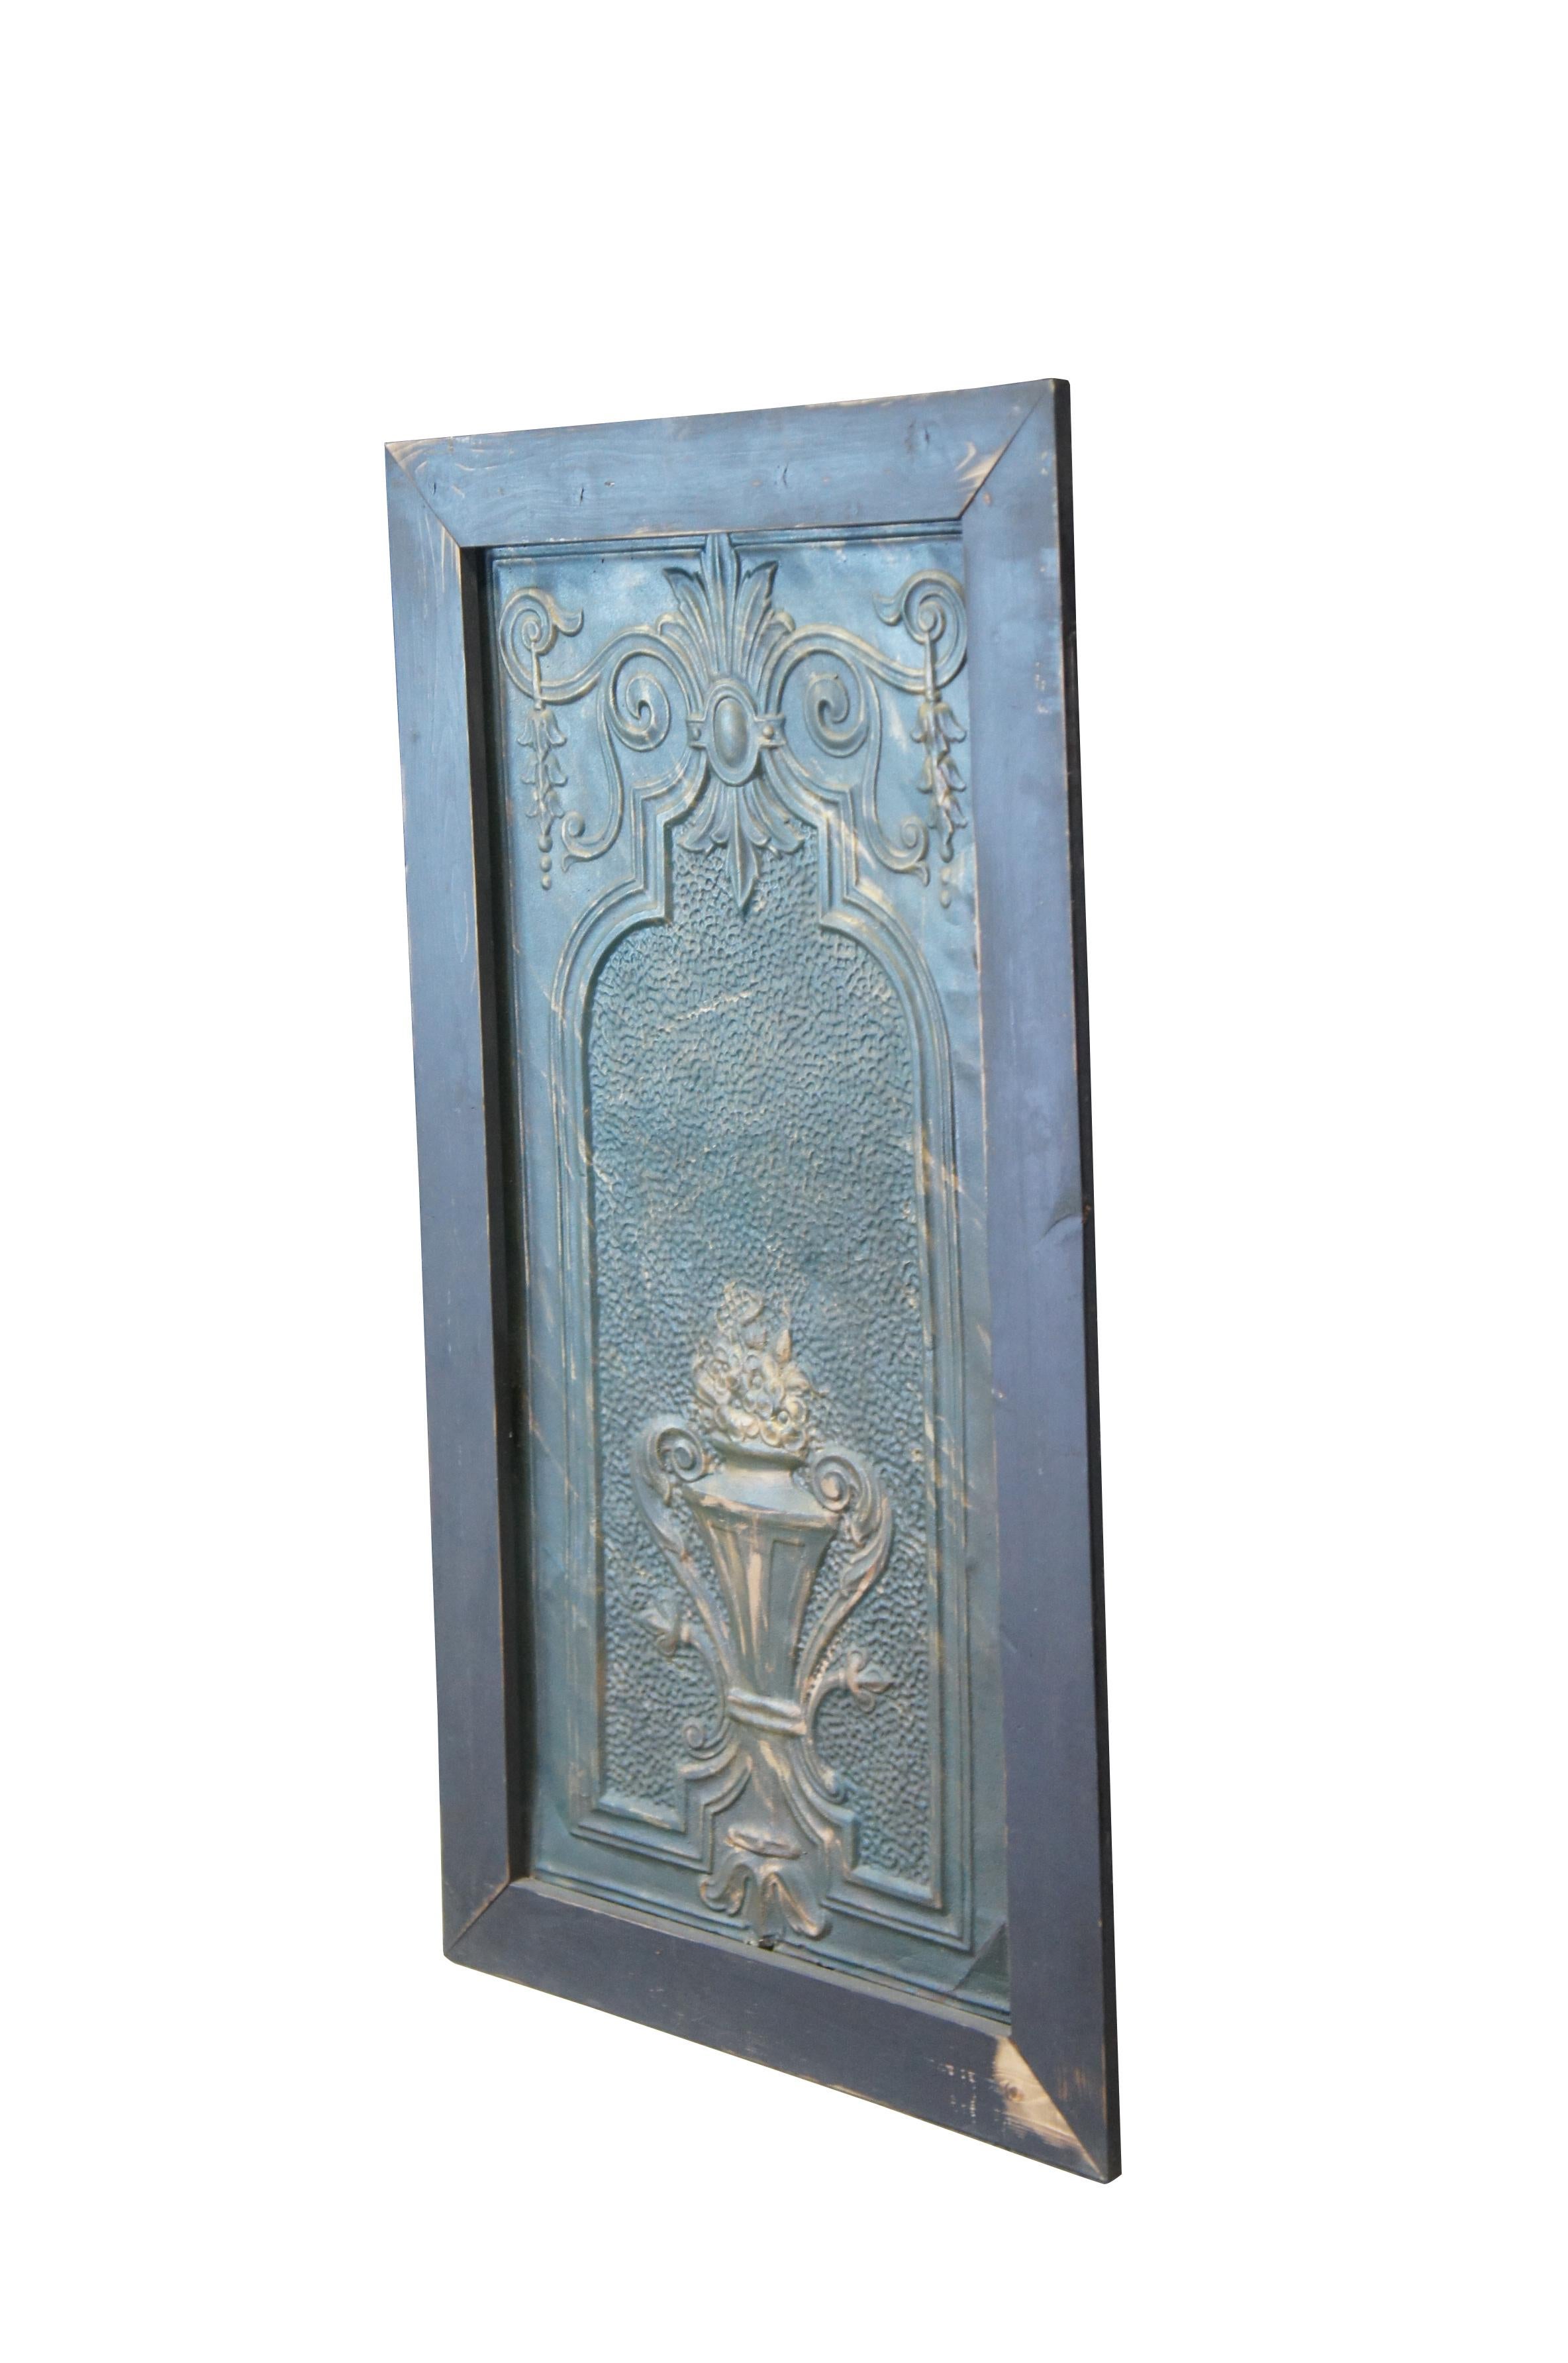 Vintage decorative embossed and hammered tin panel featuring a trophy urn with flowers, fleur de lis and acanthus accents.

Dimensions:
28